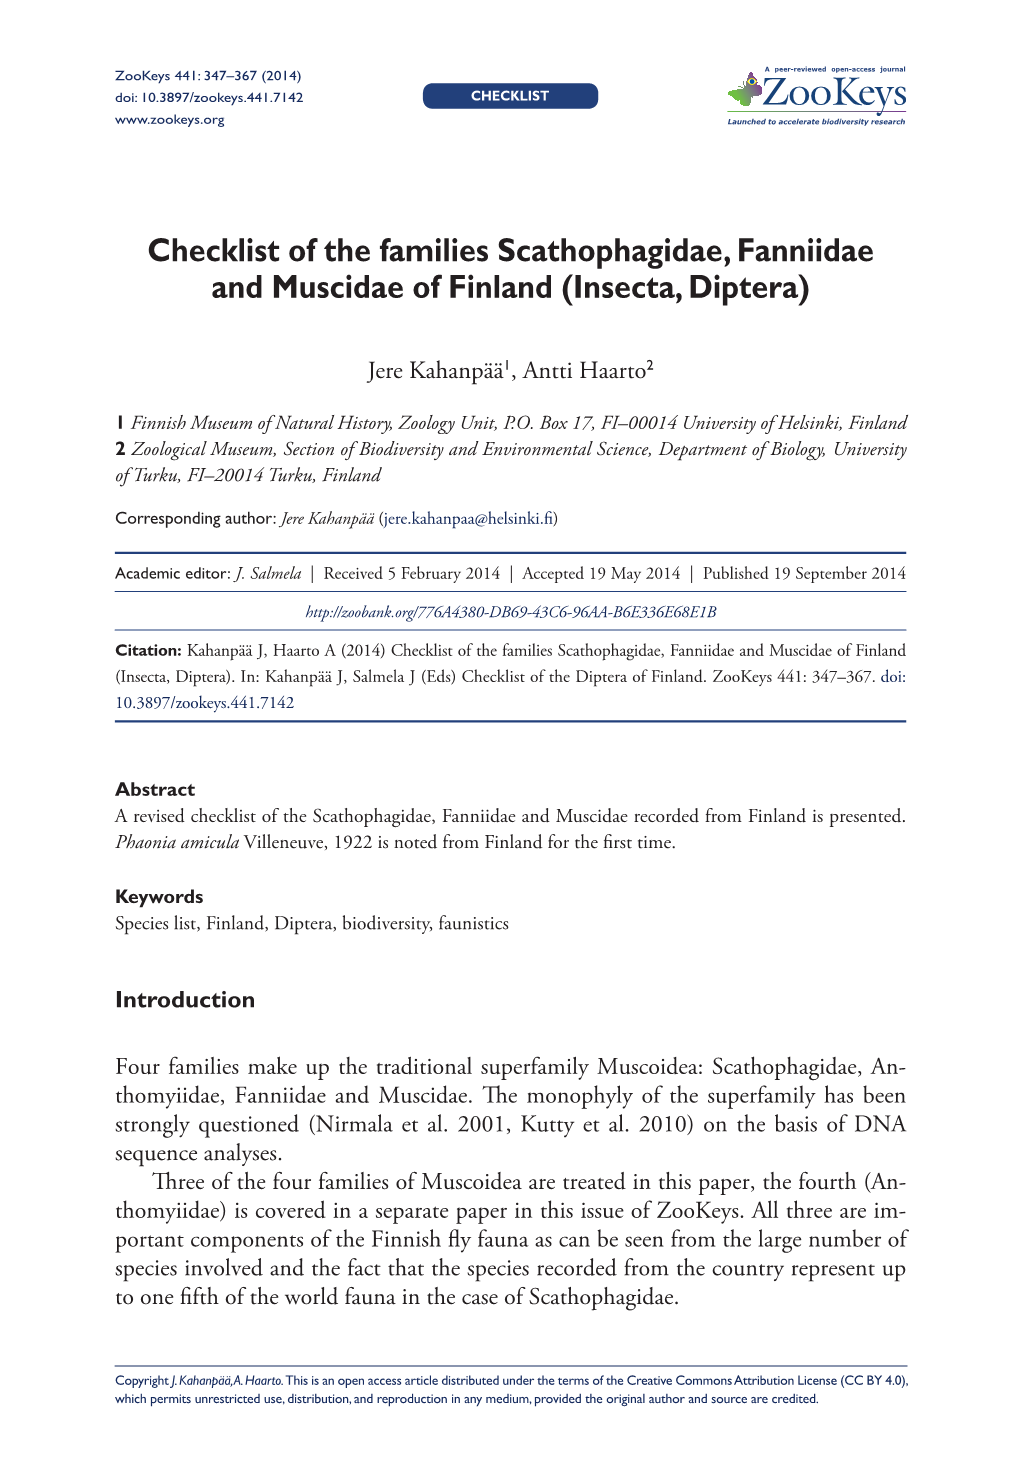 Checklist of the Families Scathophagidae, Fanniidae and Muscidae of Finland (Insecta, Diptera)